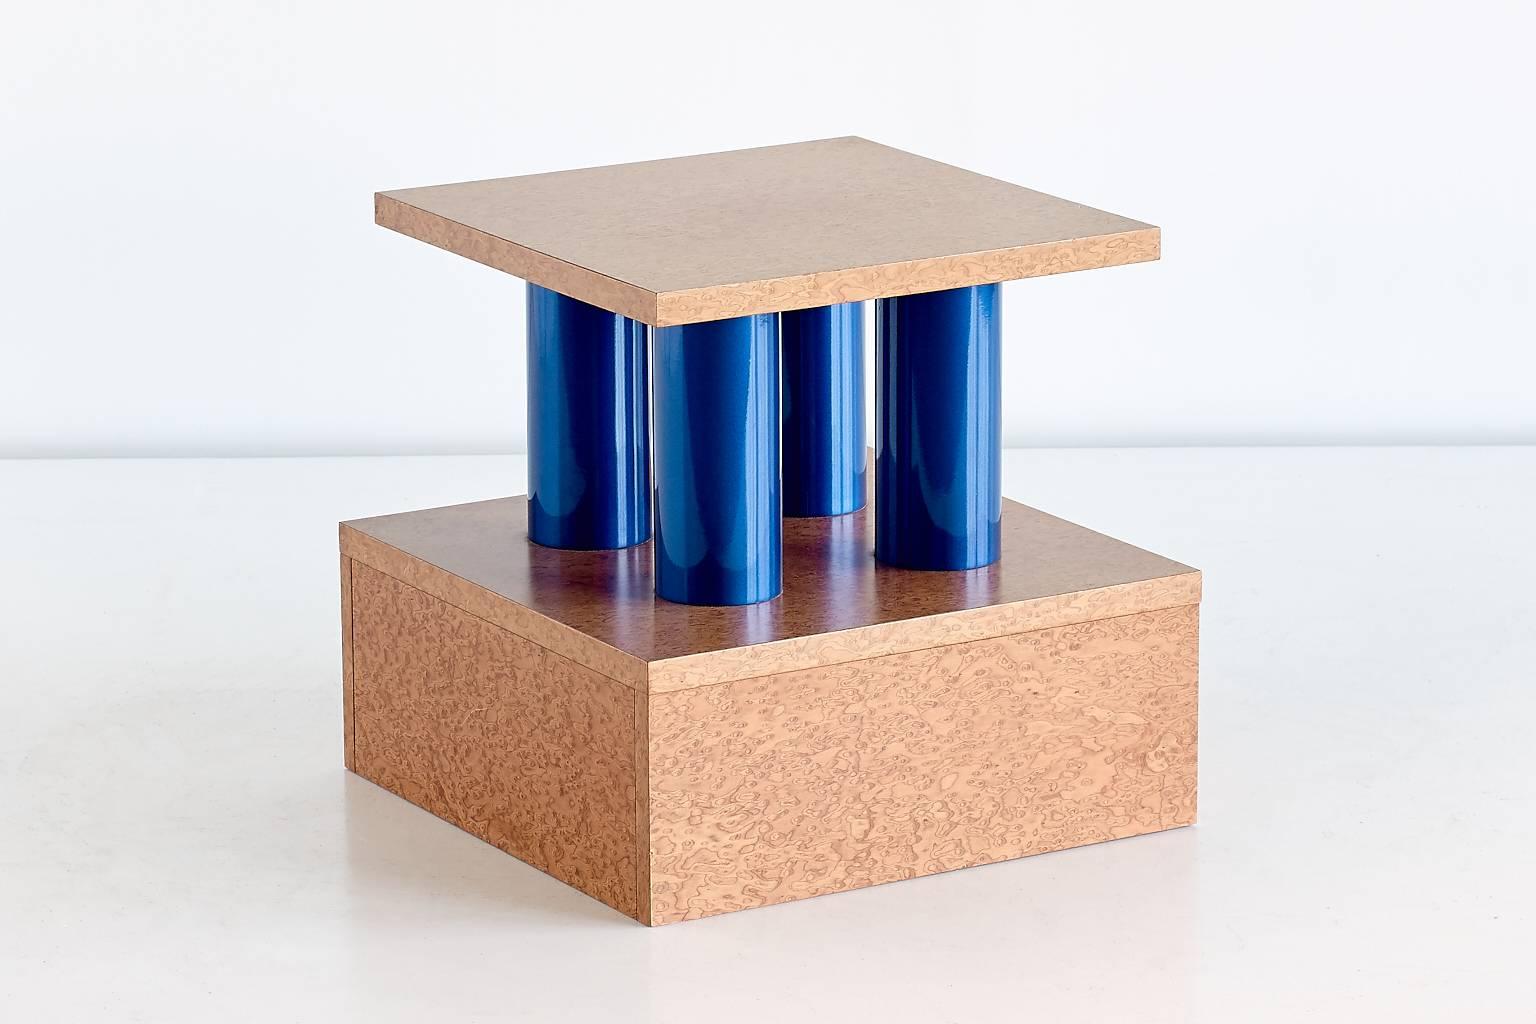 This rare side table was designed by Ettore Sottsass and Marco Zanini in 1985. The wooden parts, executed in bird’s eye maple, offer a striking contrast with the four blue metal tubes on which the table top is resting. Part of the 'Donau' series,